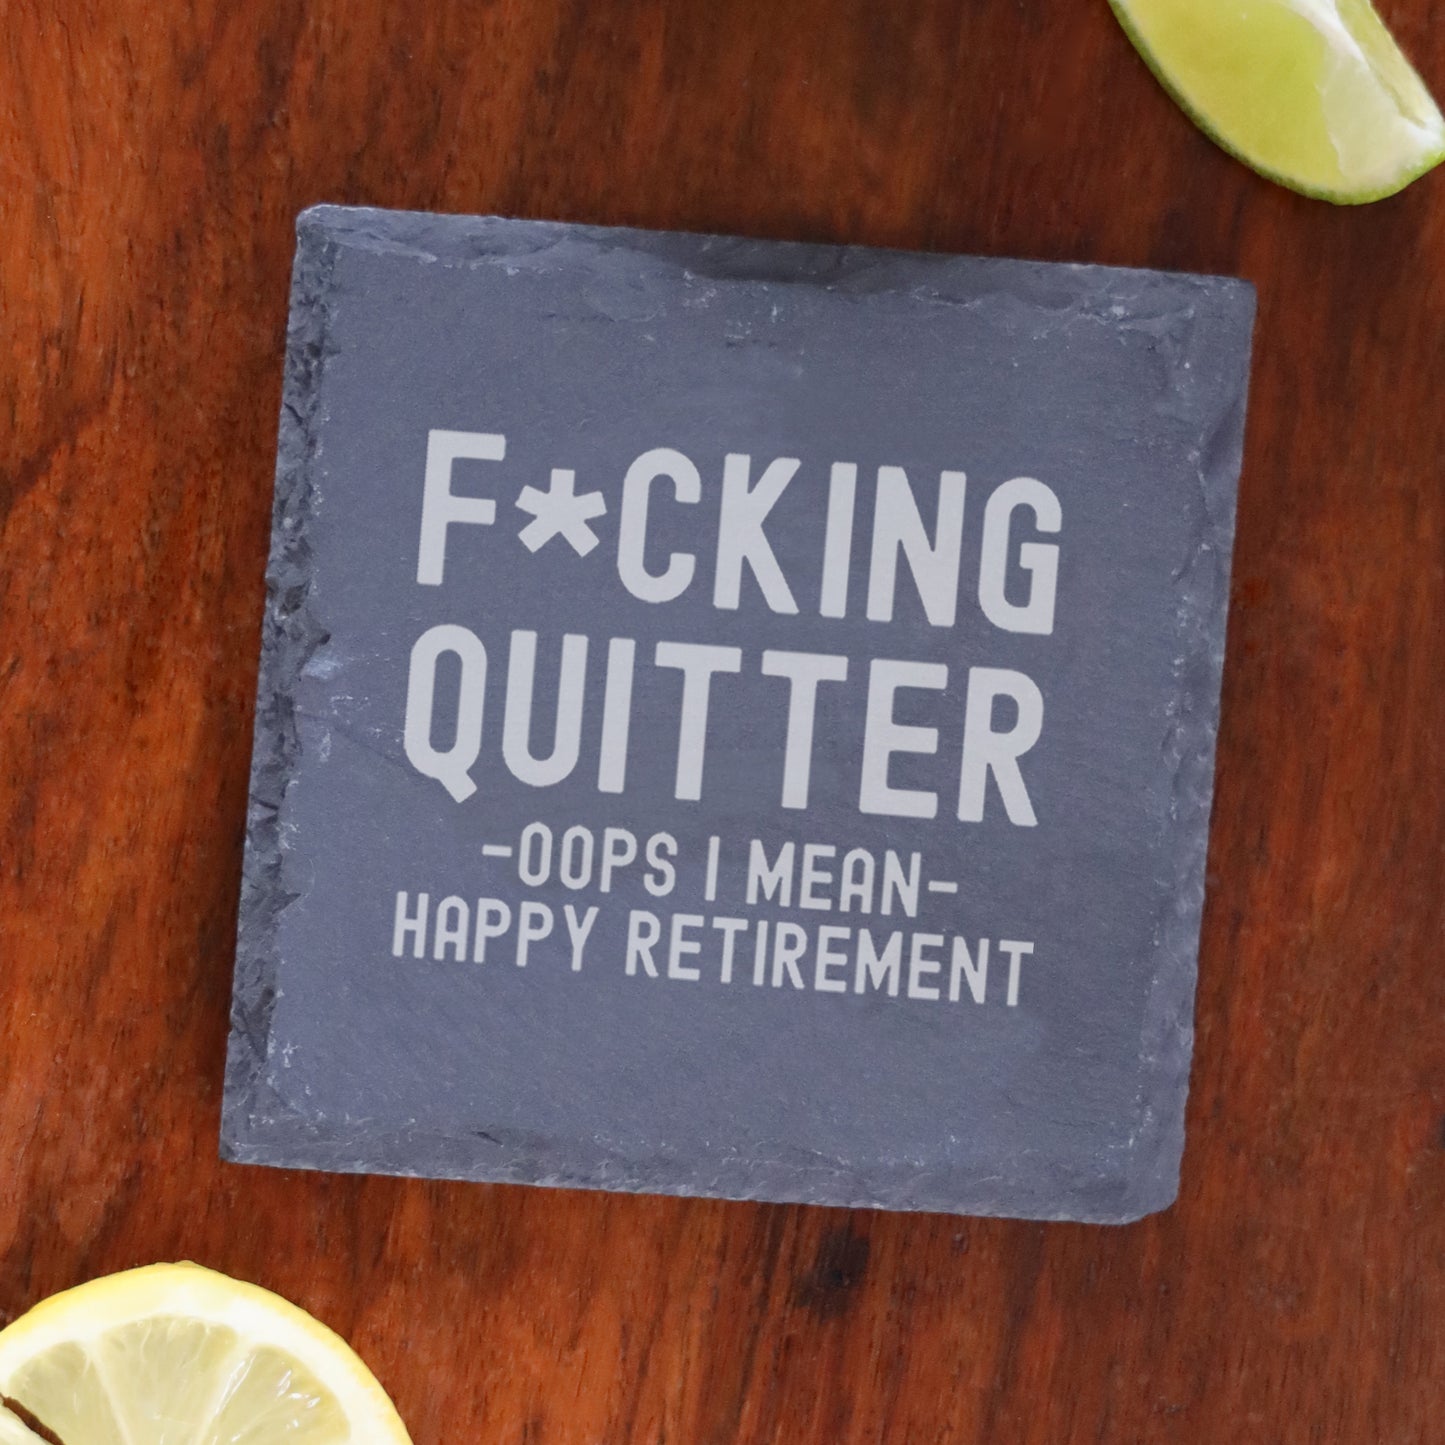 Engraved "F*cking Quitter, Oops I mean Happy Retirement" Beer Glass and/or Coaster Novelty Gift  - Always Looking Good - Square Coaster Only  